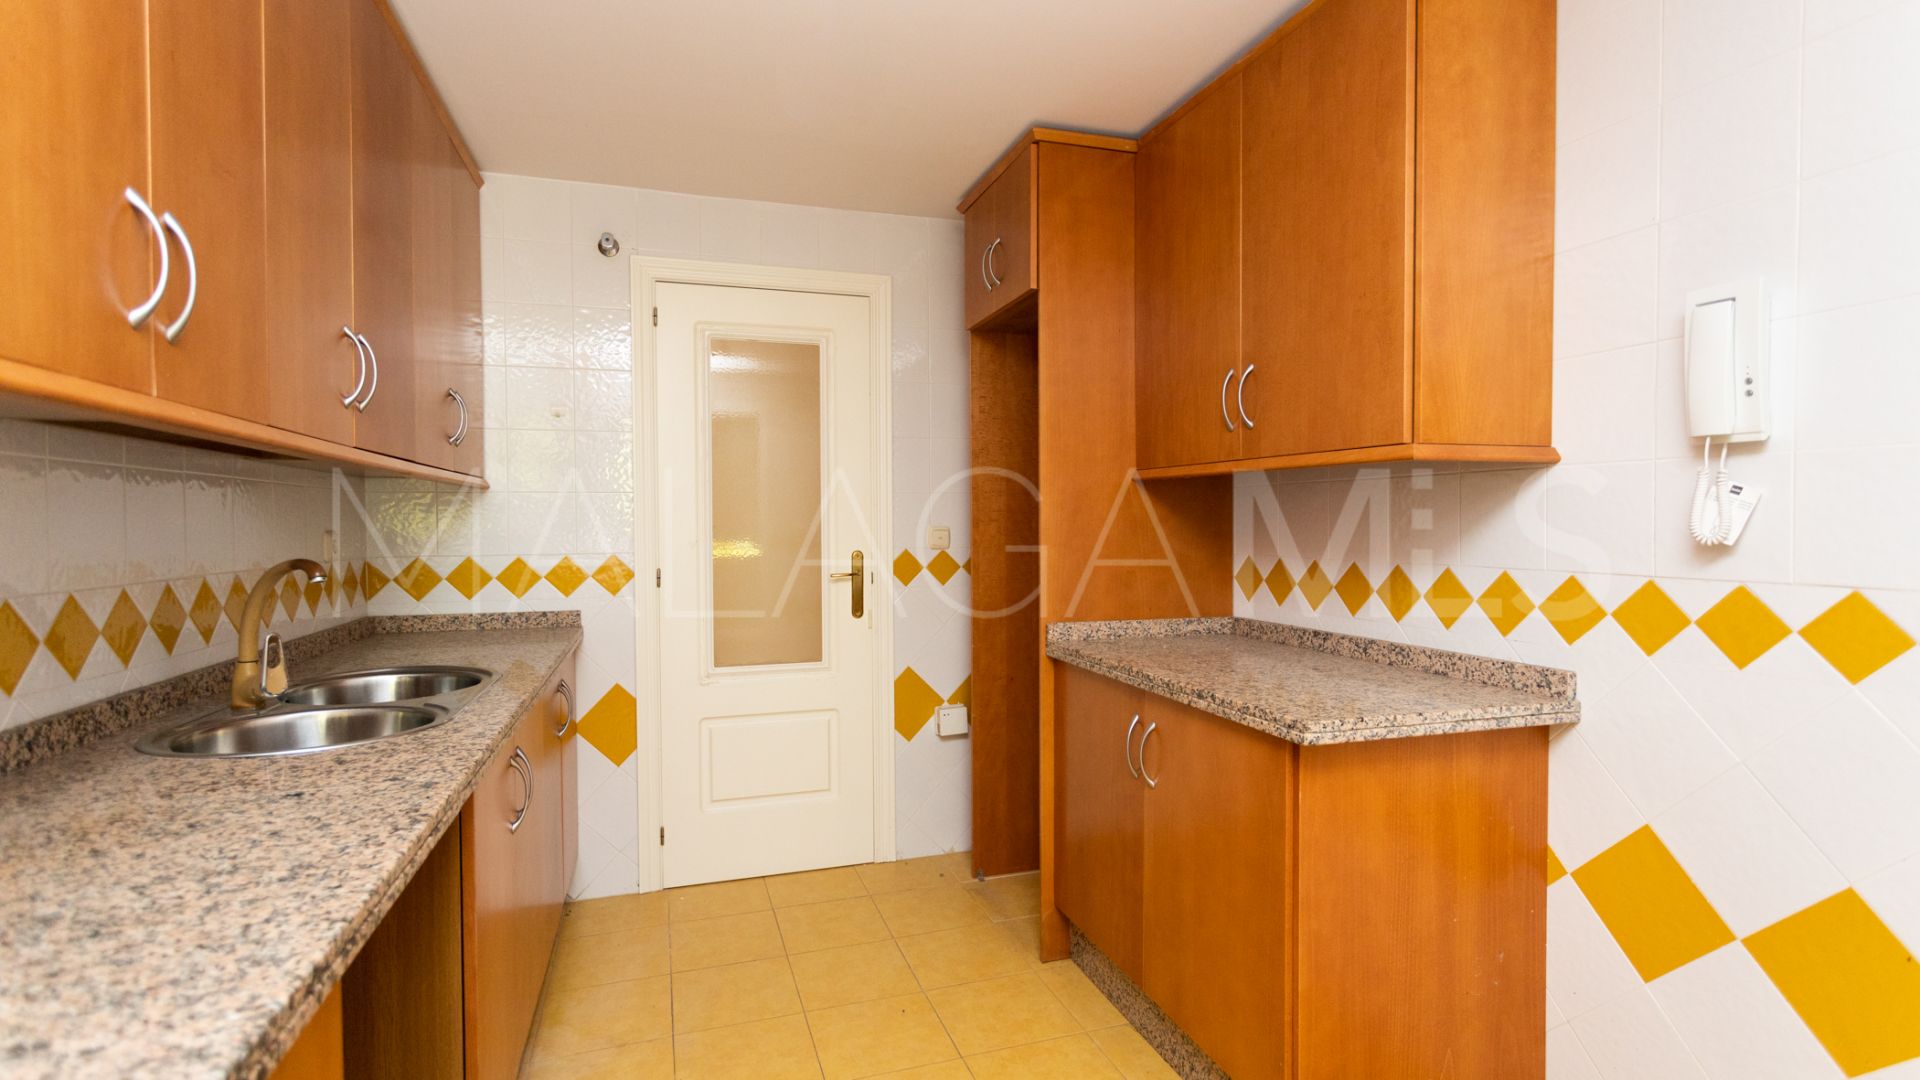 For sale apartment with 1 bedroom in Rio Real